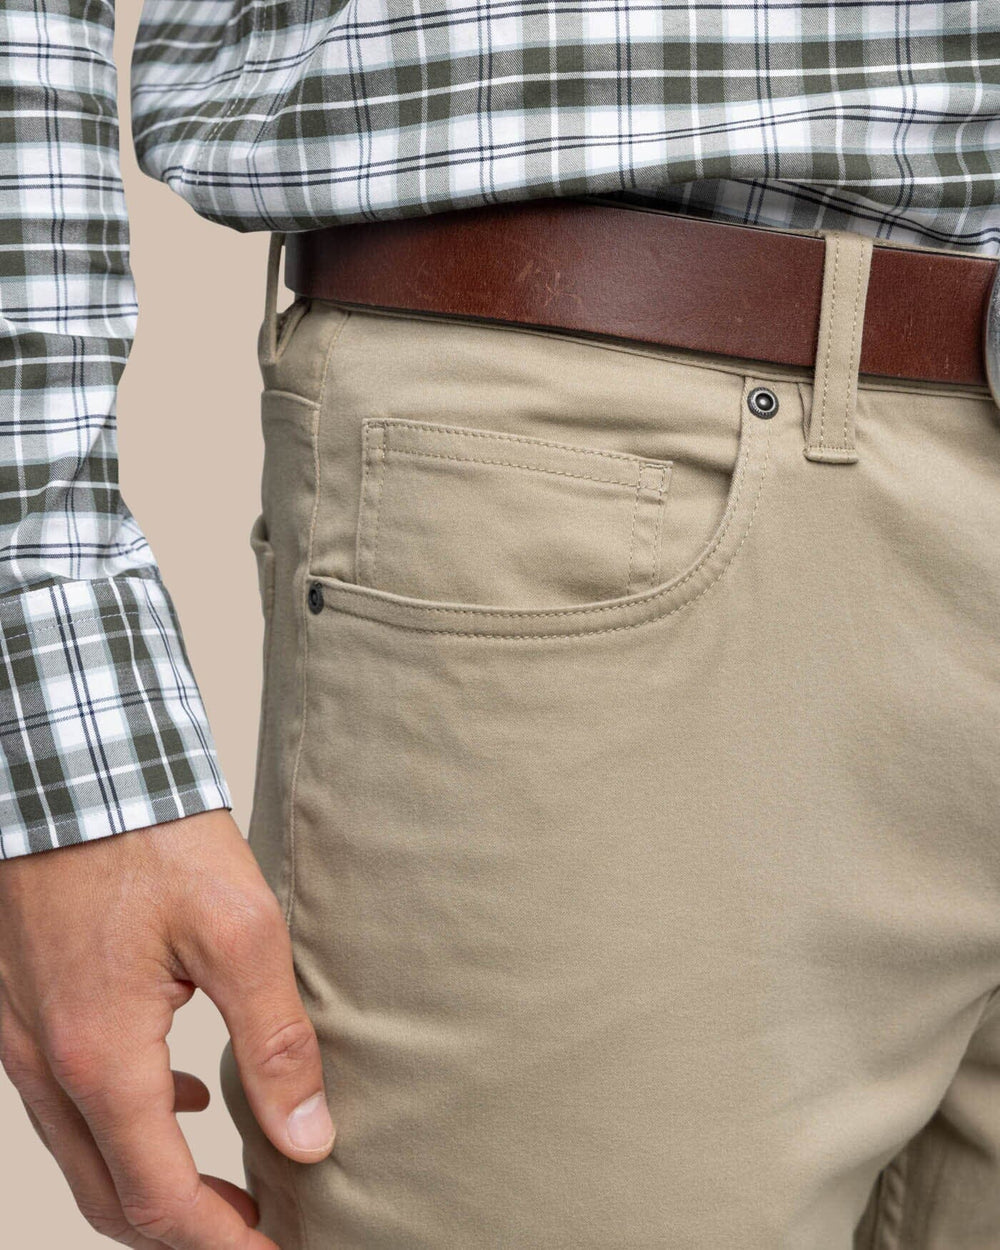 The detail view of the Southern Tide Sullivan Five Pocket Pant by Southern Tide - Sandstone Khaki